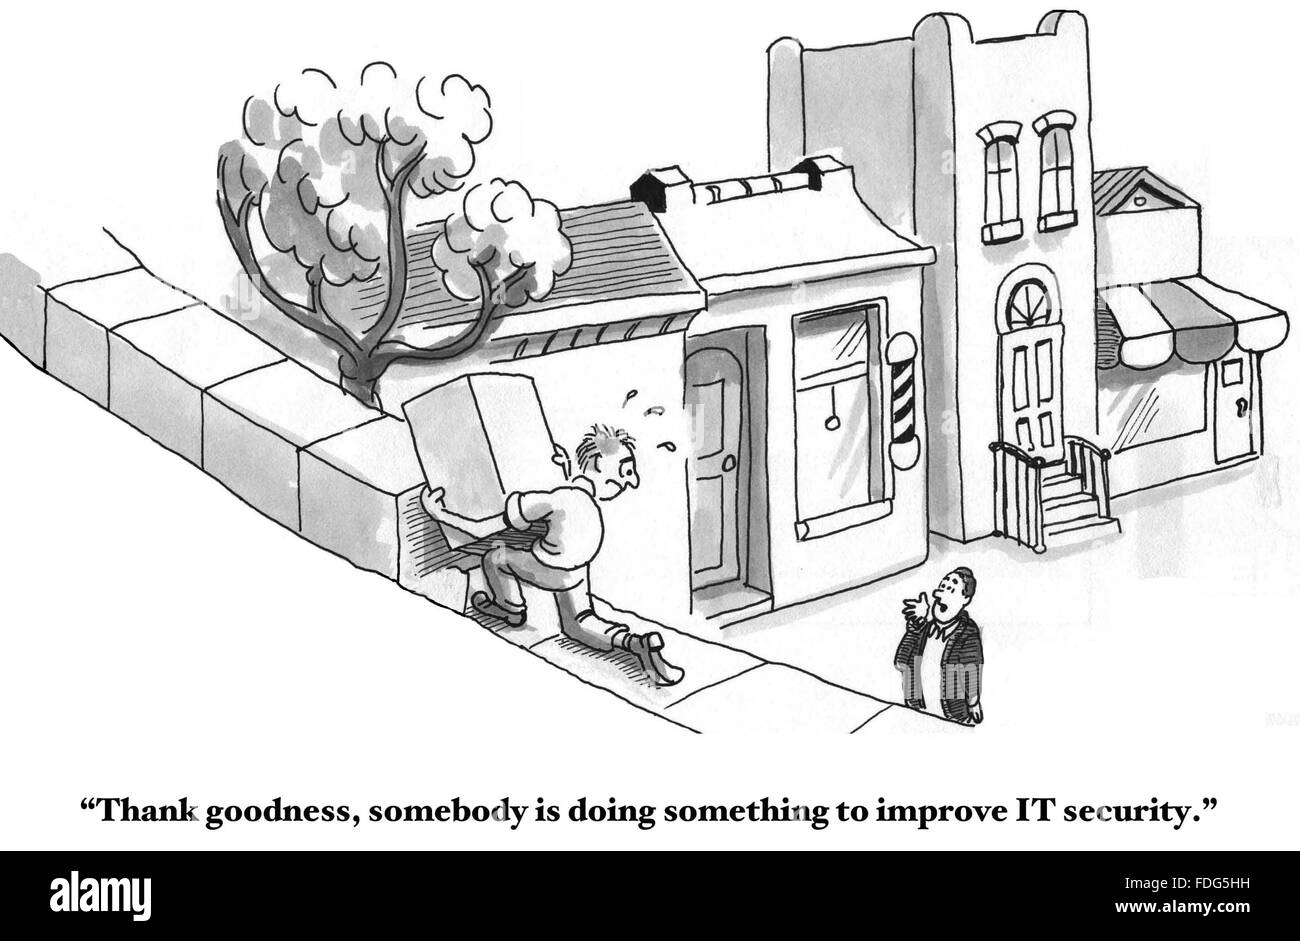 Business cartoon about IT security.  The technician is building a wall to improve IT security. Stock Photo